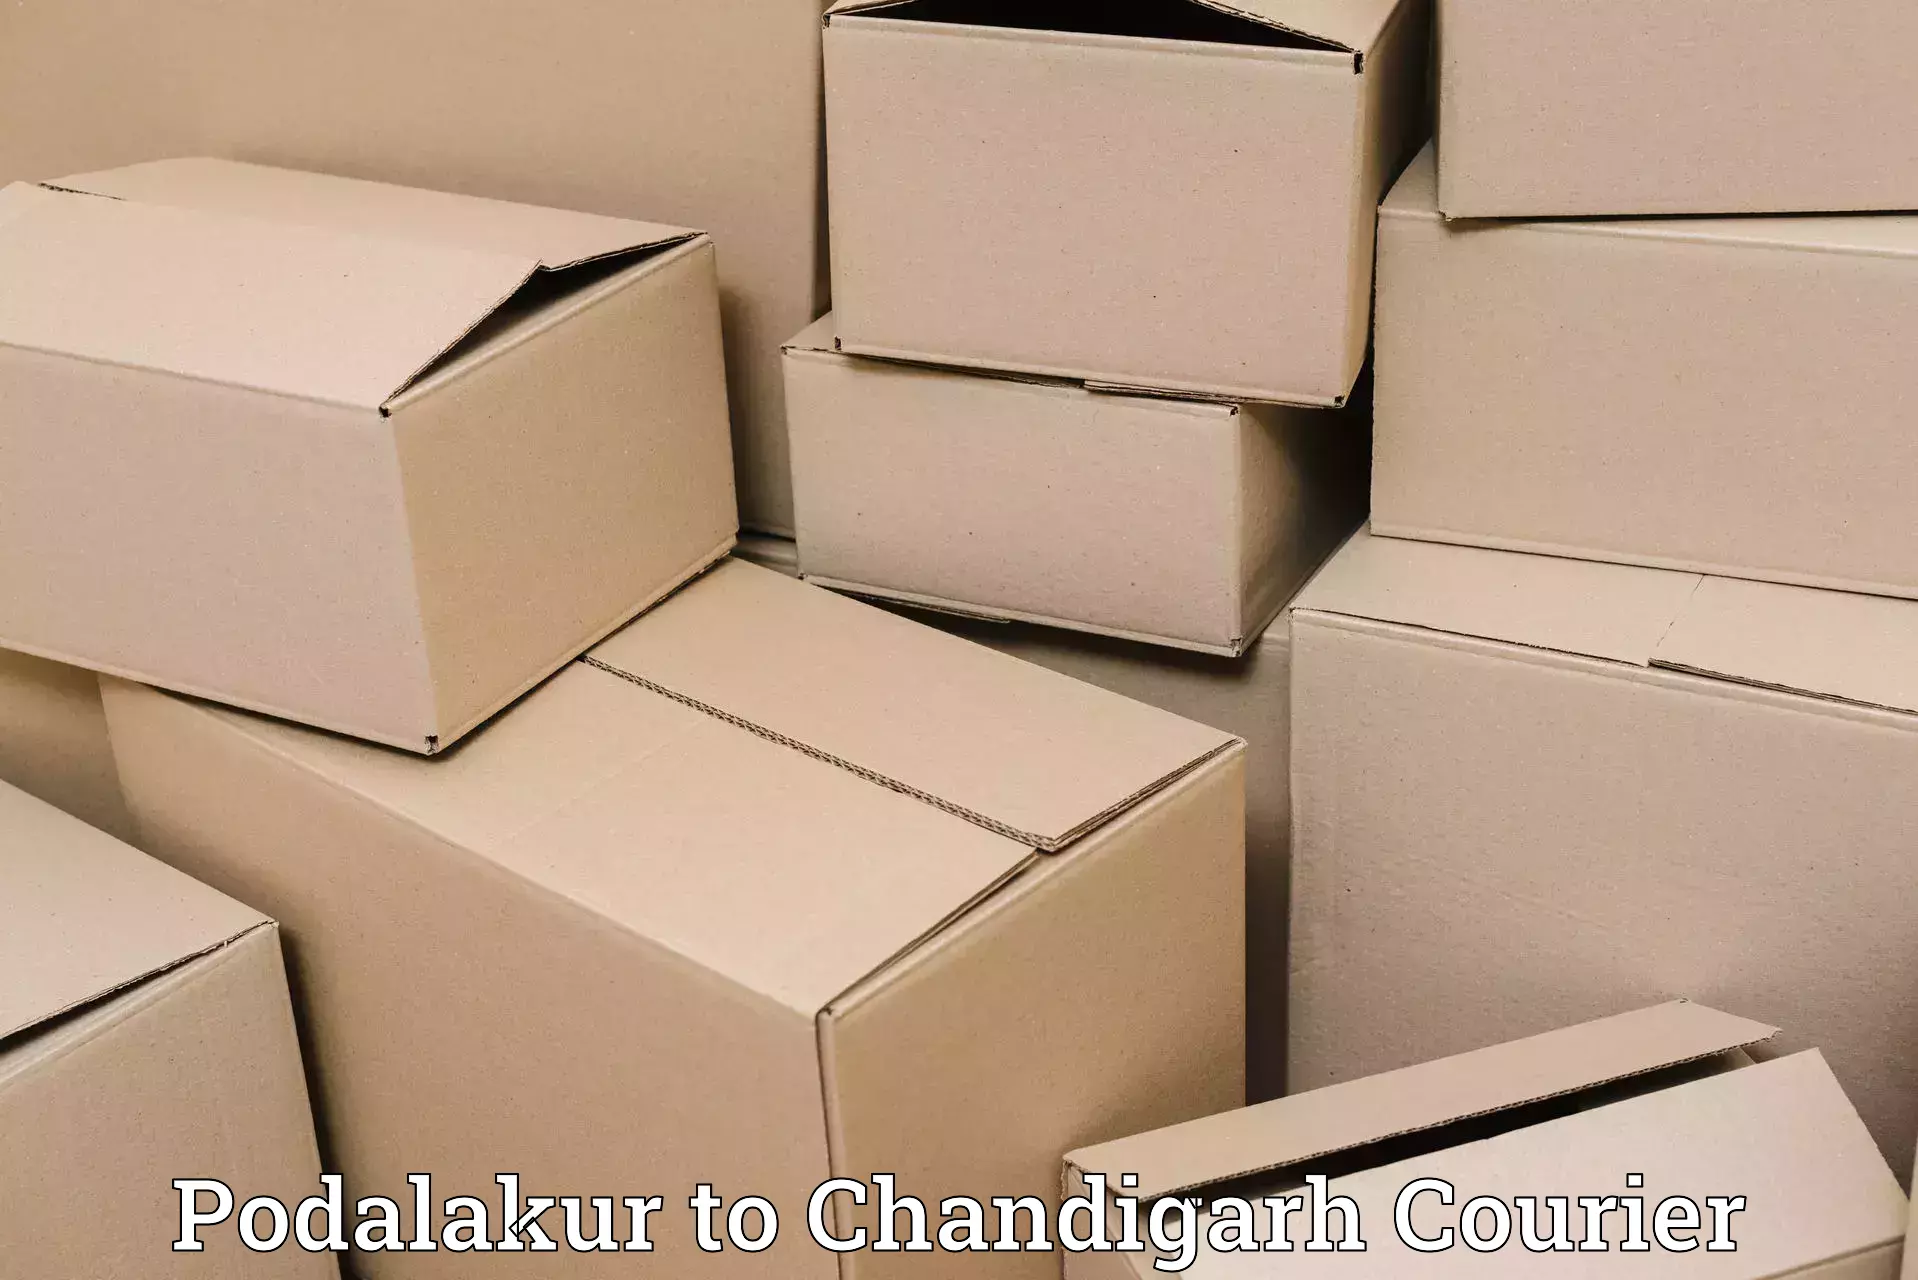 Luggage transport deals Podalakur to Chandigarh